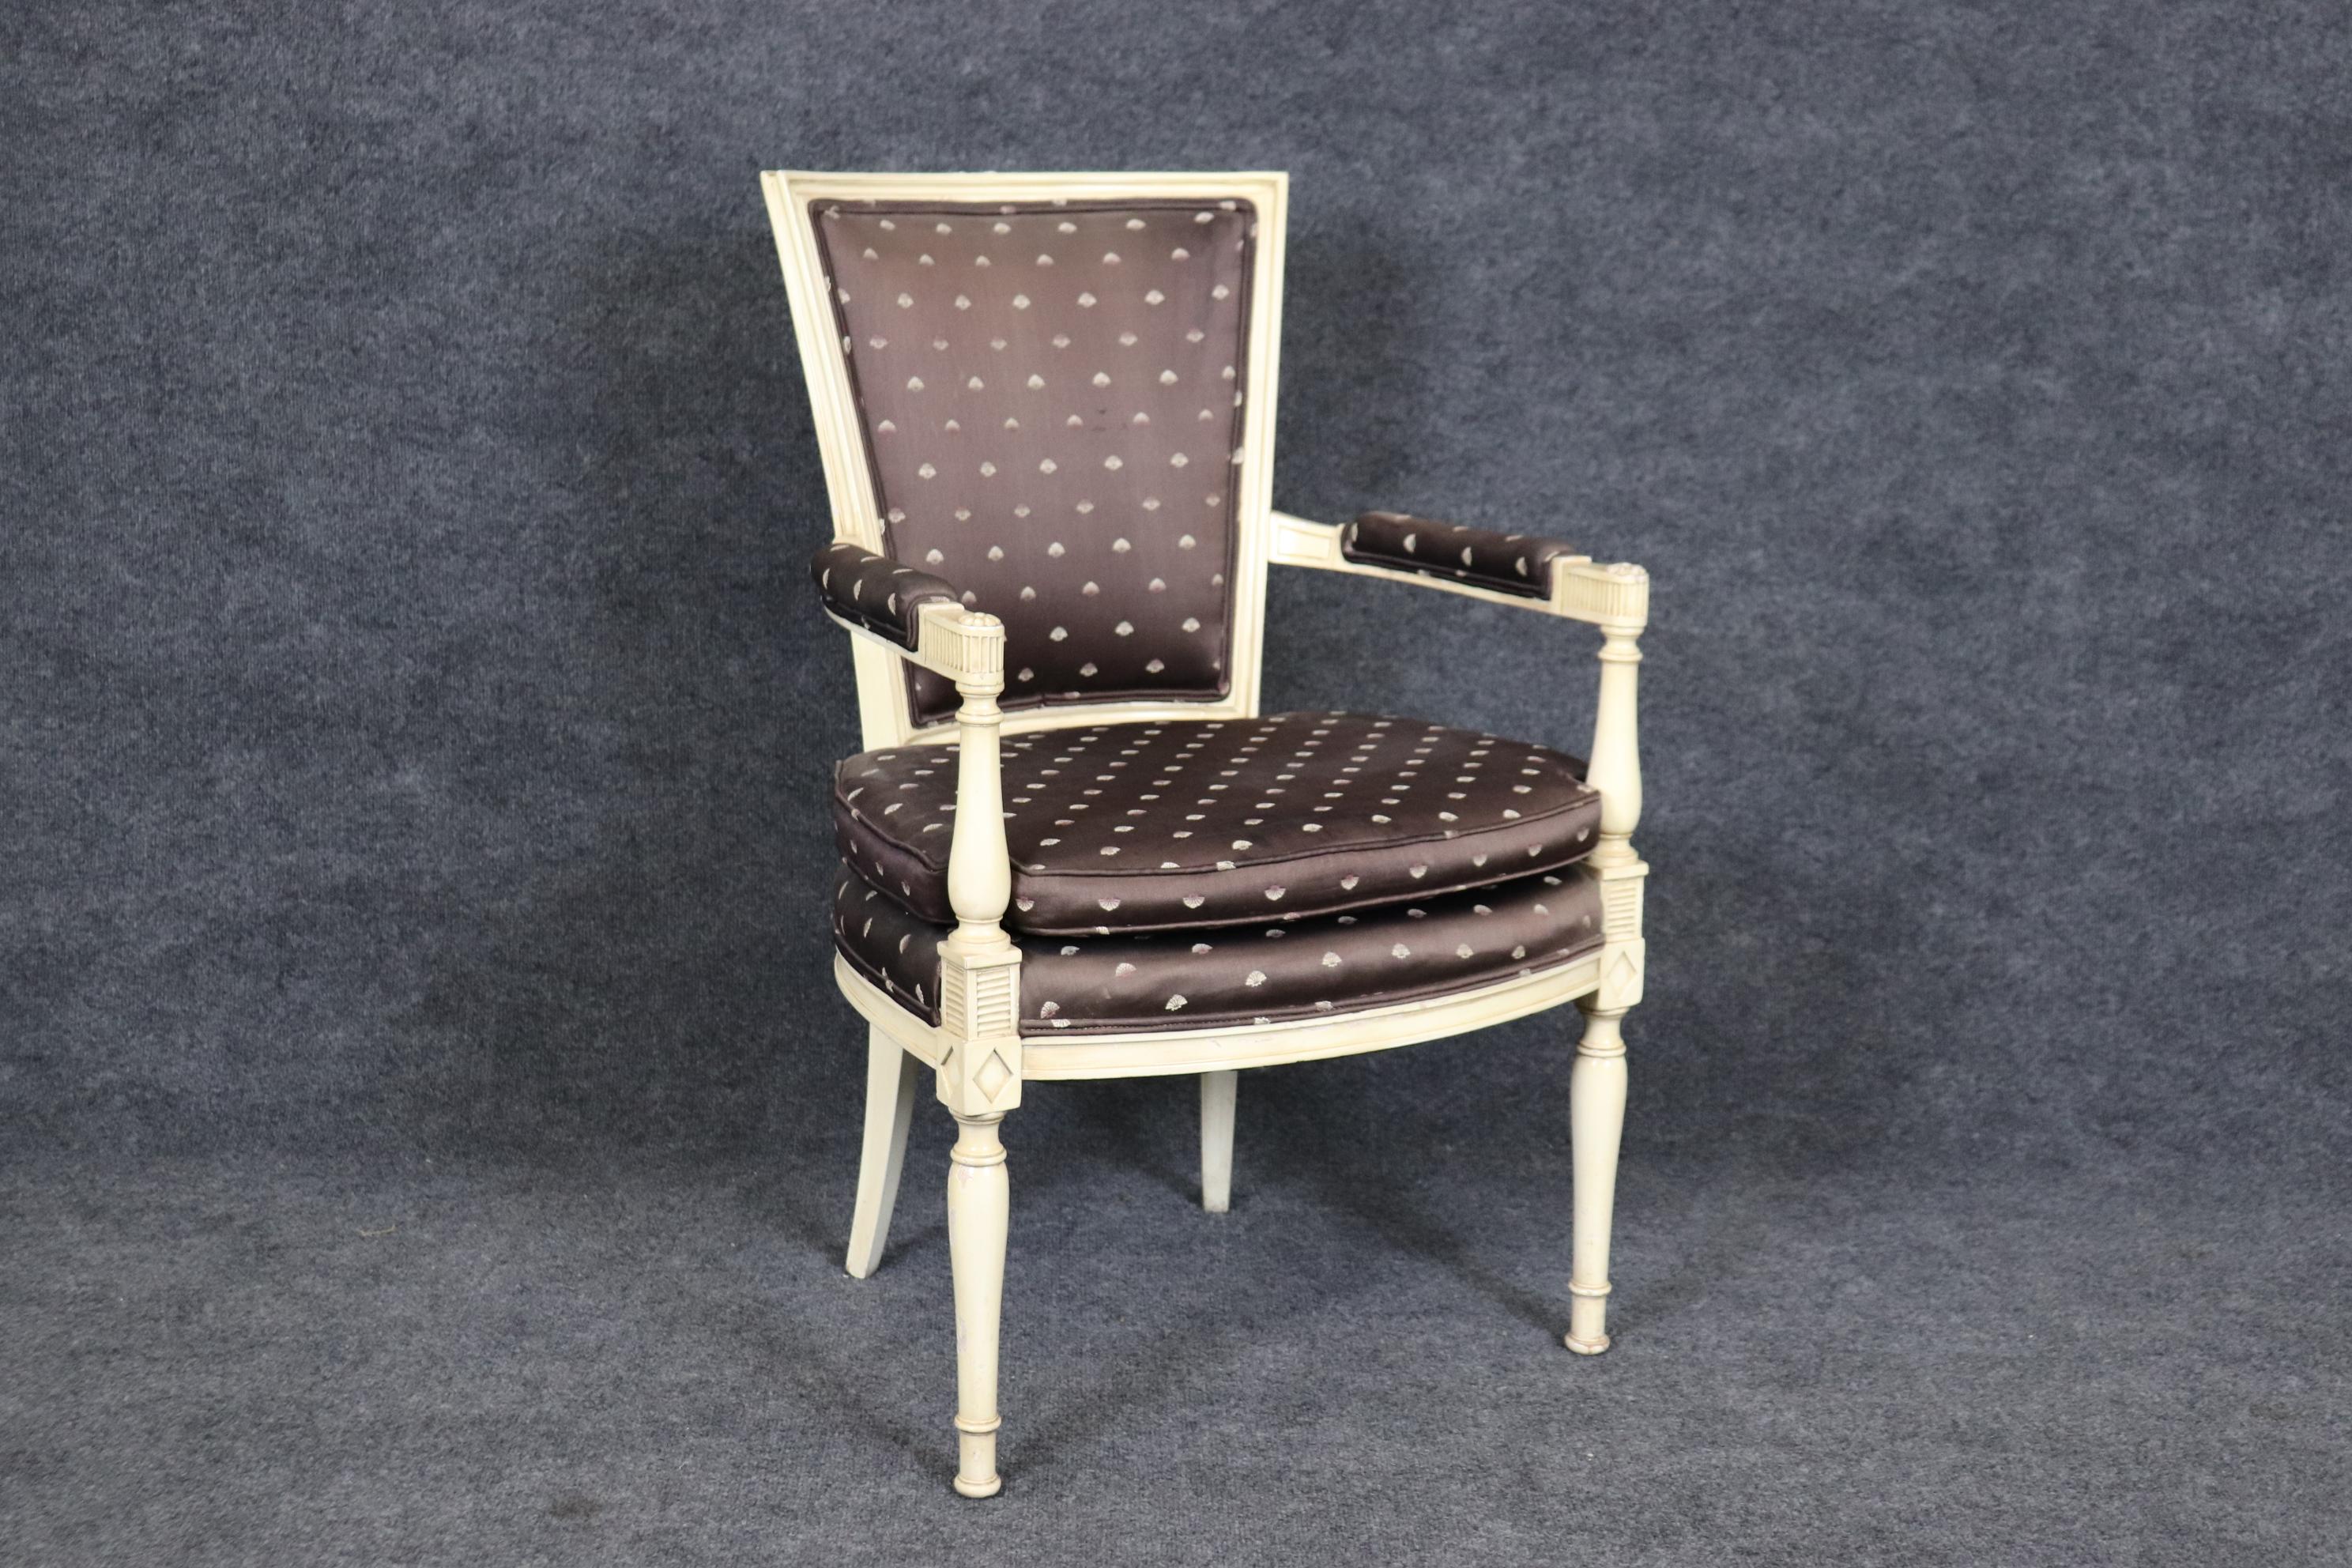 This is a gorgeous Directoire French-made Maison Jansen style armchair. The chair looks like Jansen and may very well be but isn't marked. The chair is in good condition with normal age-related wear to frame, finish and minor wear to upholstery.